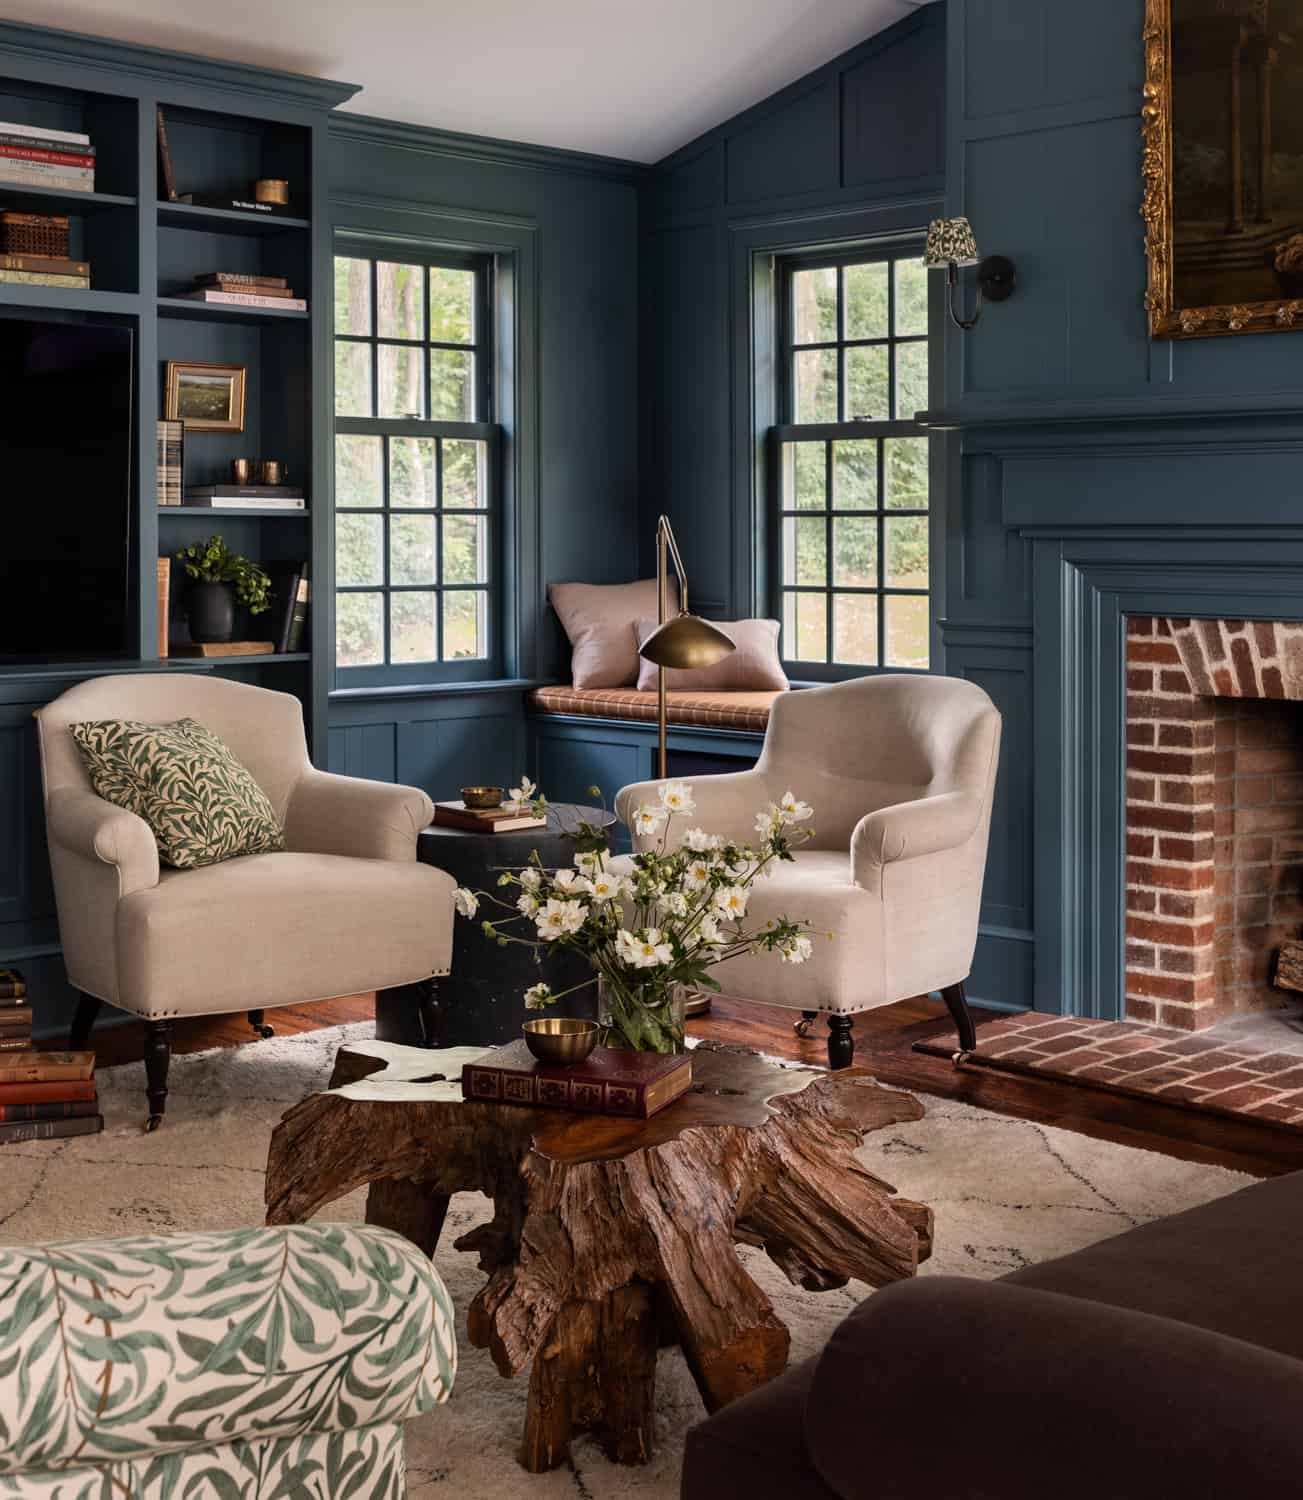 Heidi-Caillier-Design-Hudson-Valley-house-dark-blue-family-room-william-morris-sofa-vintage-floral-painting-cozy-nordroom